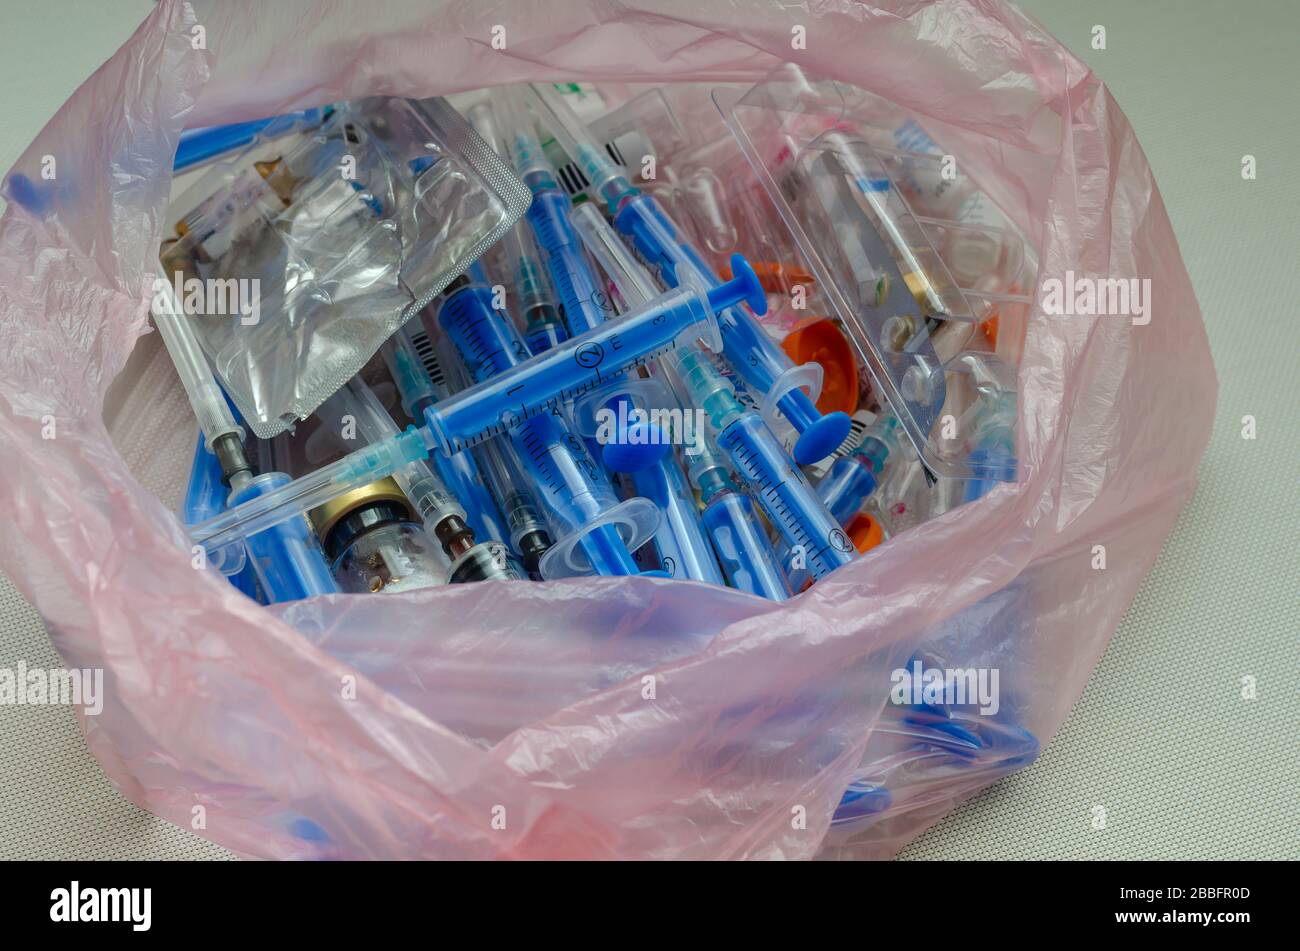 Used syringes, vials and ampoules in a bag. Cellophane bag with medical waste. Medical instruments for disposal. Close-up. Selective focus. Stock Photo